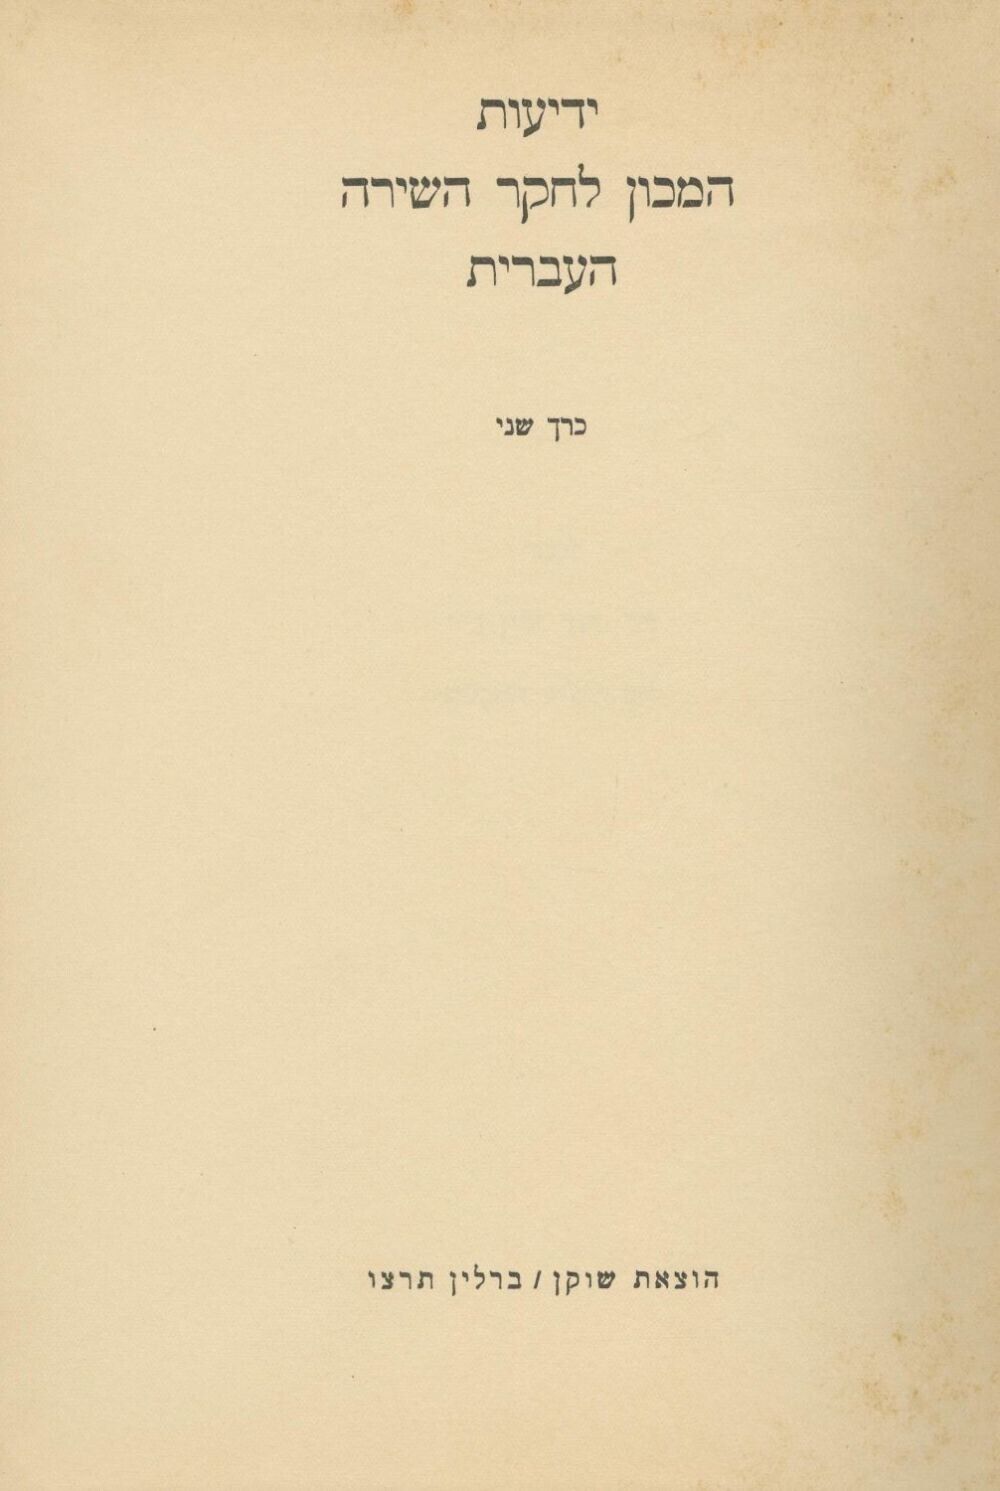 5 Volumes Jewish Books Research Institute for Hebrew Poetry in Jerusalem Zionism